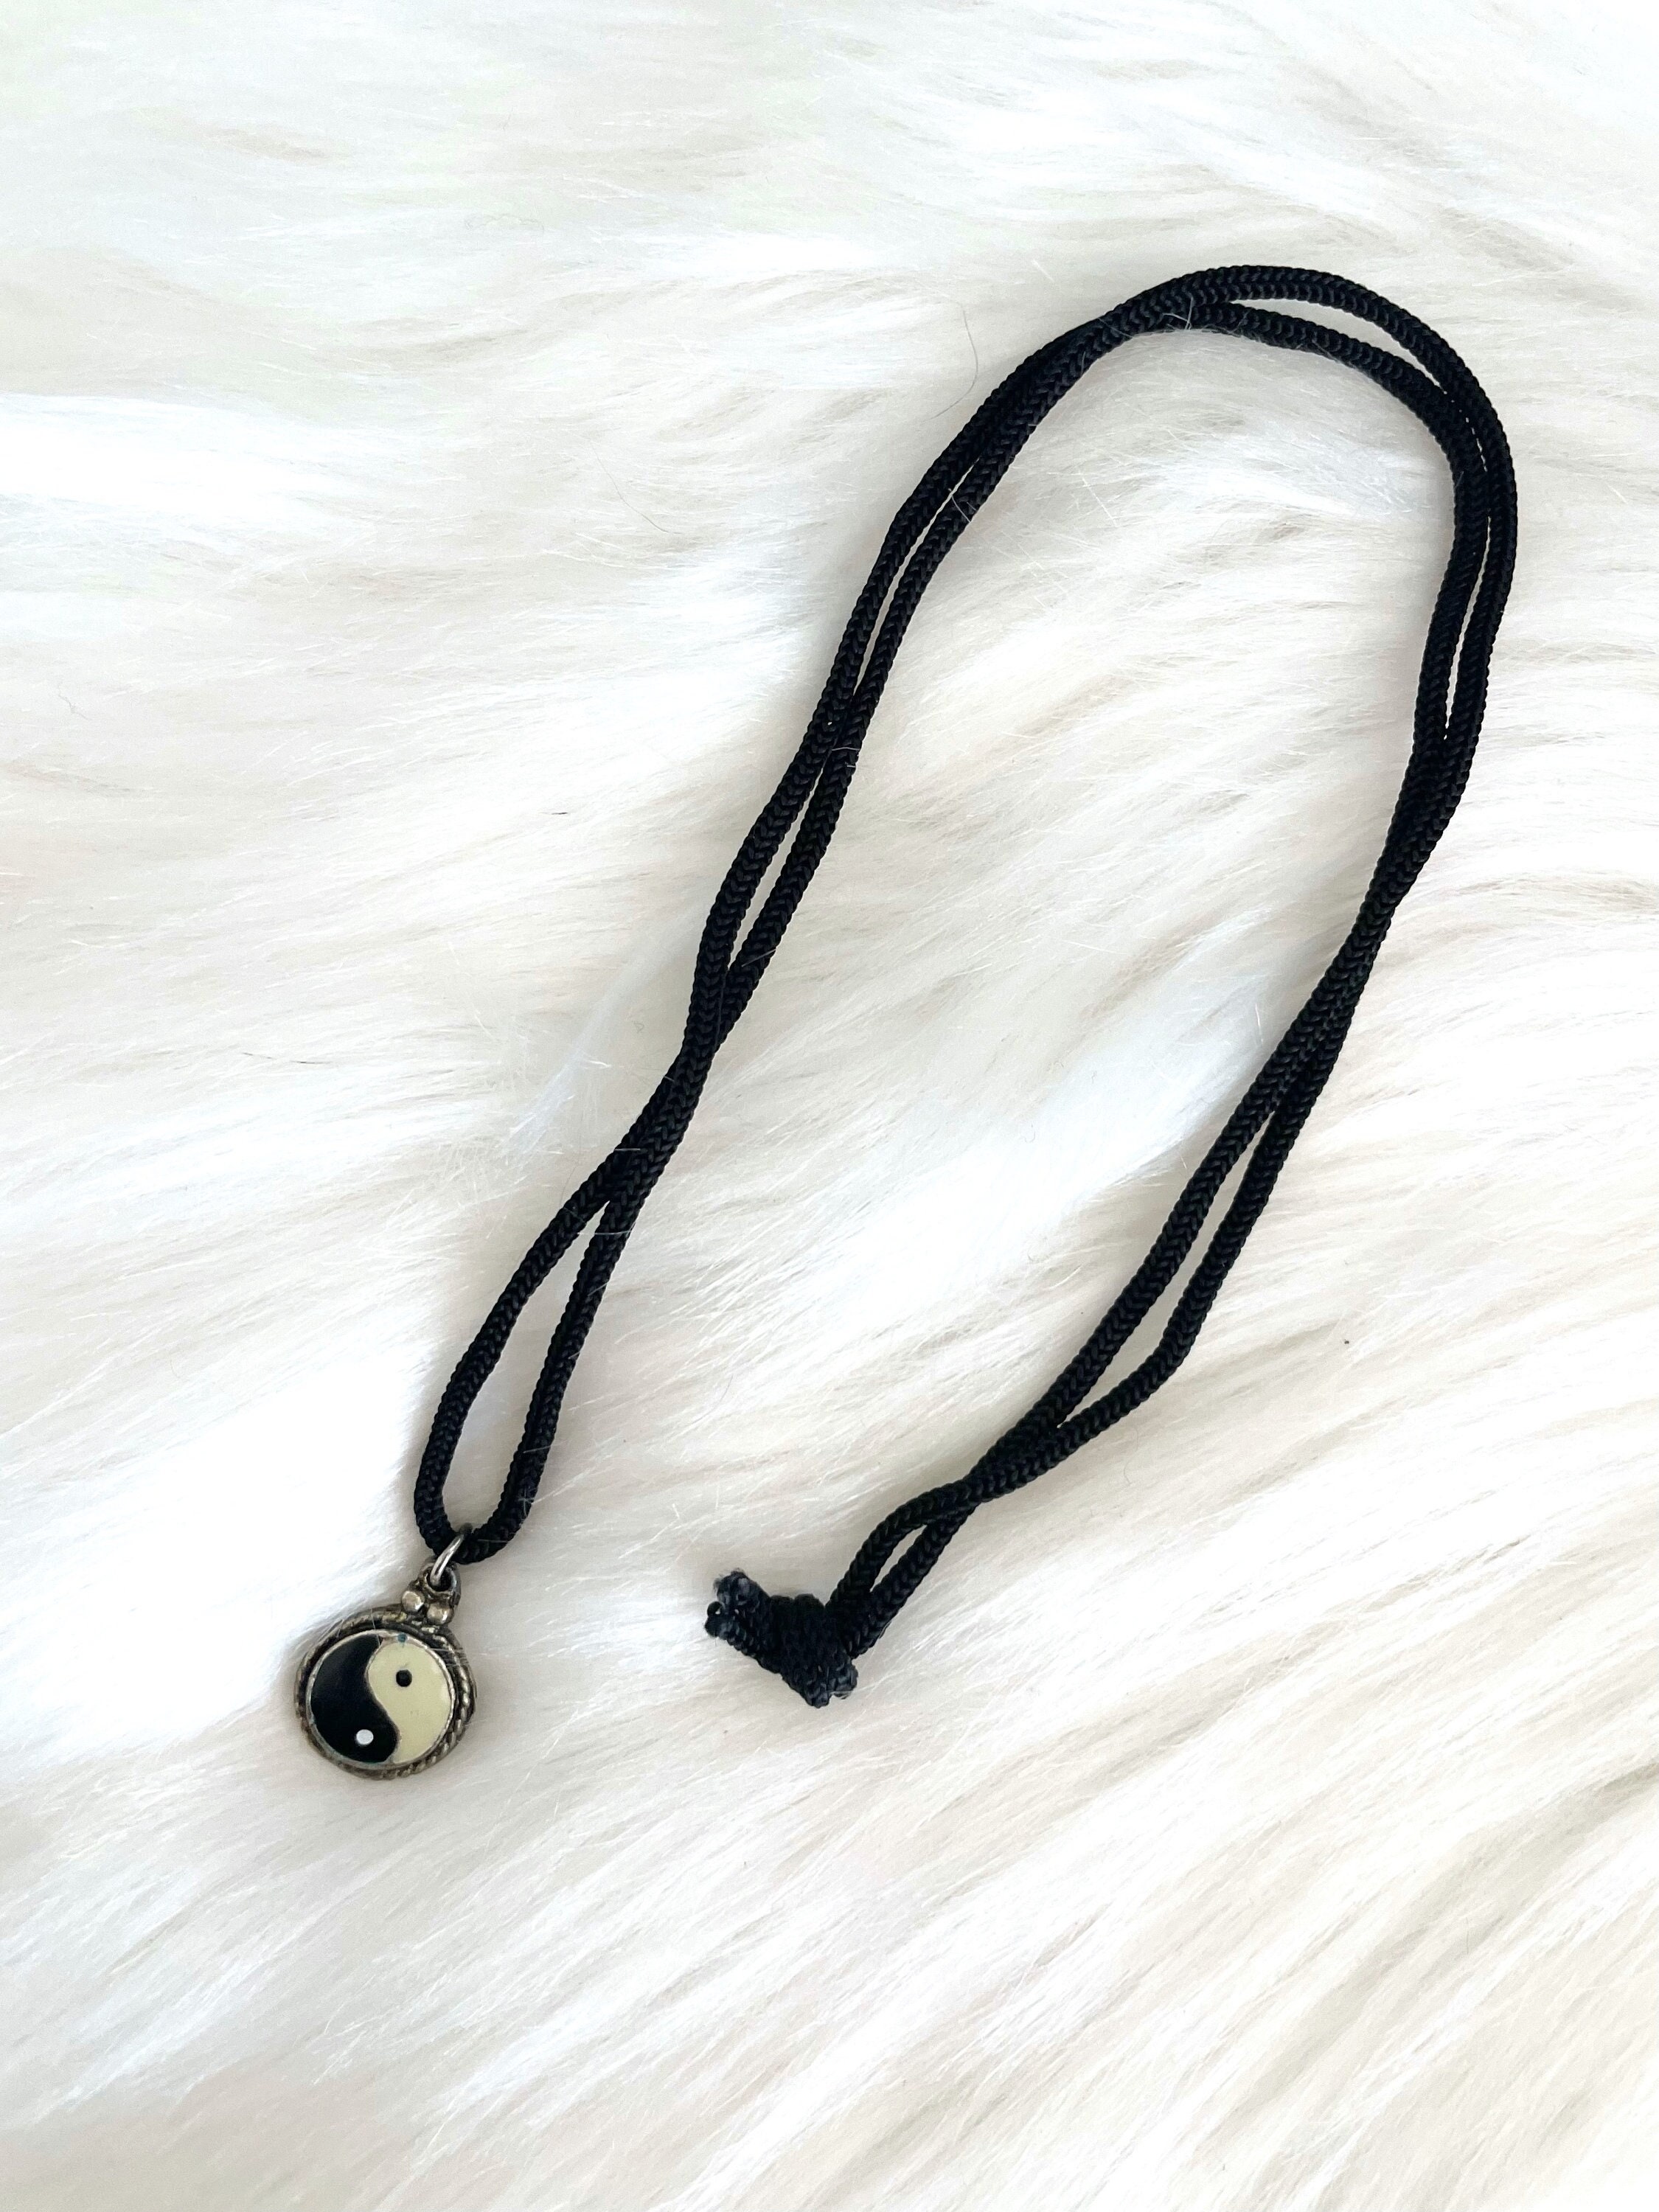 Yheakne Boho Leather Choker Necklace Thin Black Suede Velvet Necklace Chain  Vintage Minimalist Beaded Necklace 90s Chain Jewelry for Women and Girls